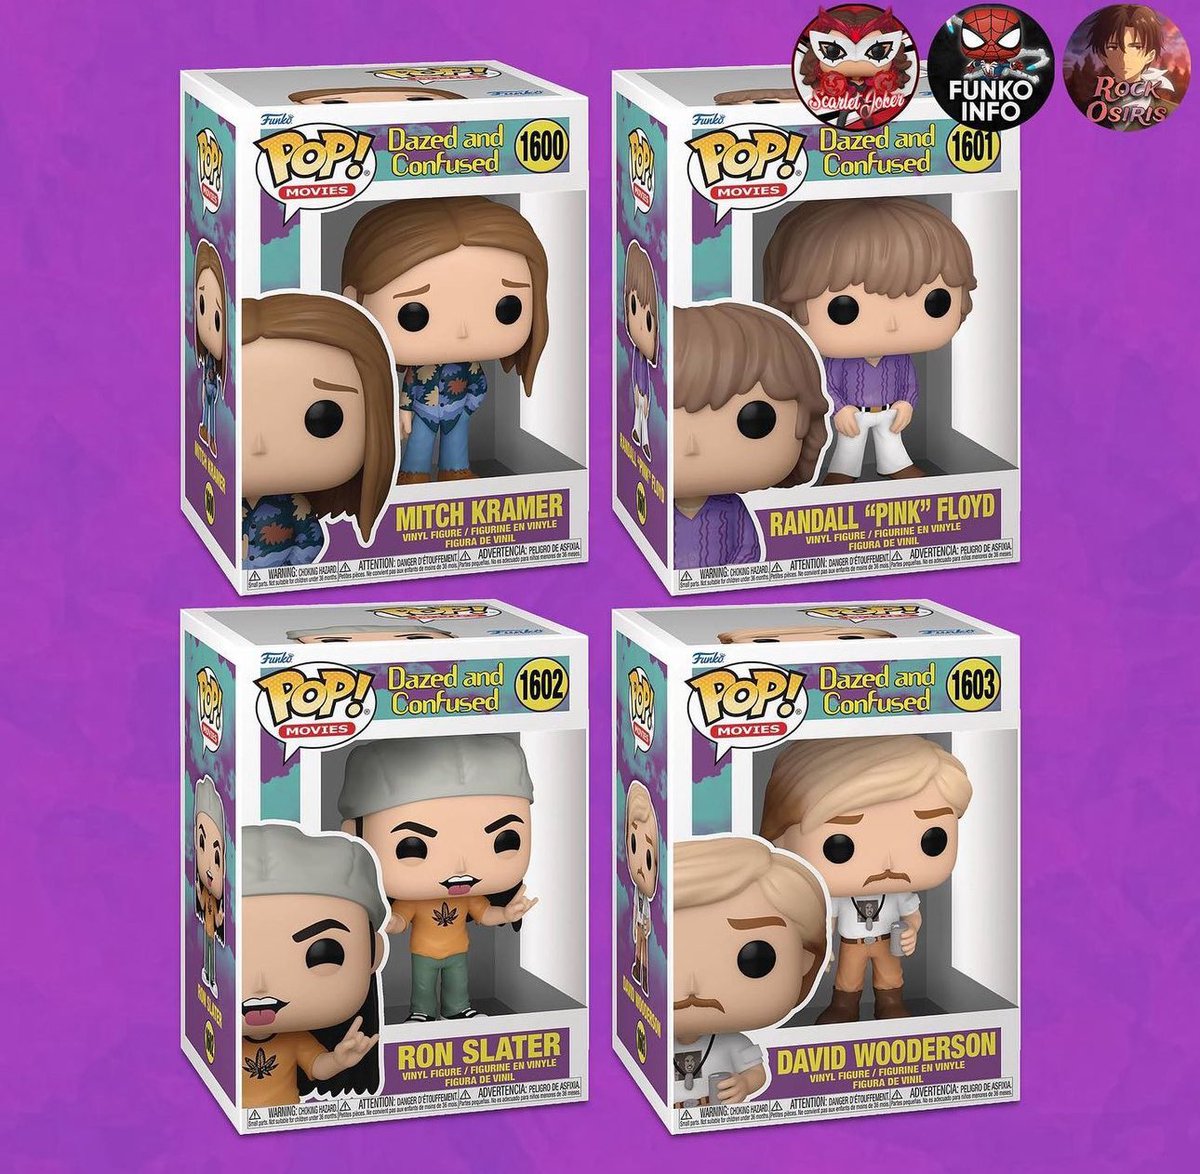 First look at Dazed & Confused Pops!
.
Credit @funkoinfo_ 
#DazedandConfused #Funko #FunkoPop #FunkoPopVinyl #Pop #PopVinyl #Collectibles #Collectible #FunkoCollector #FunkoPops #Collector #Toy #Toys #DisTrackers